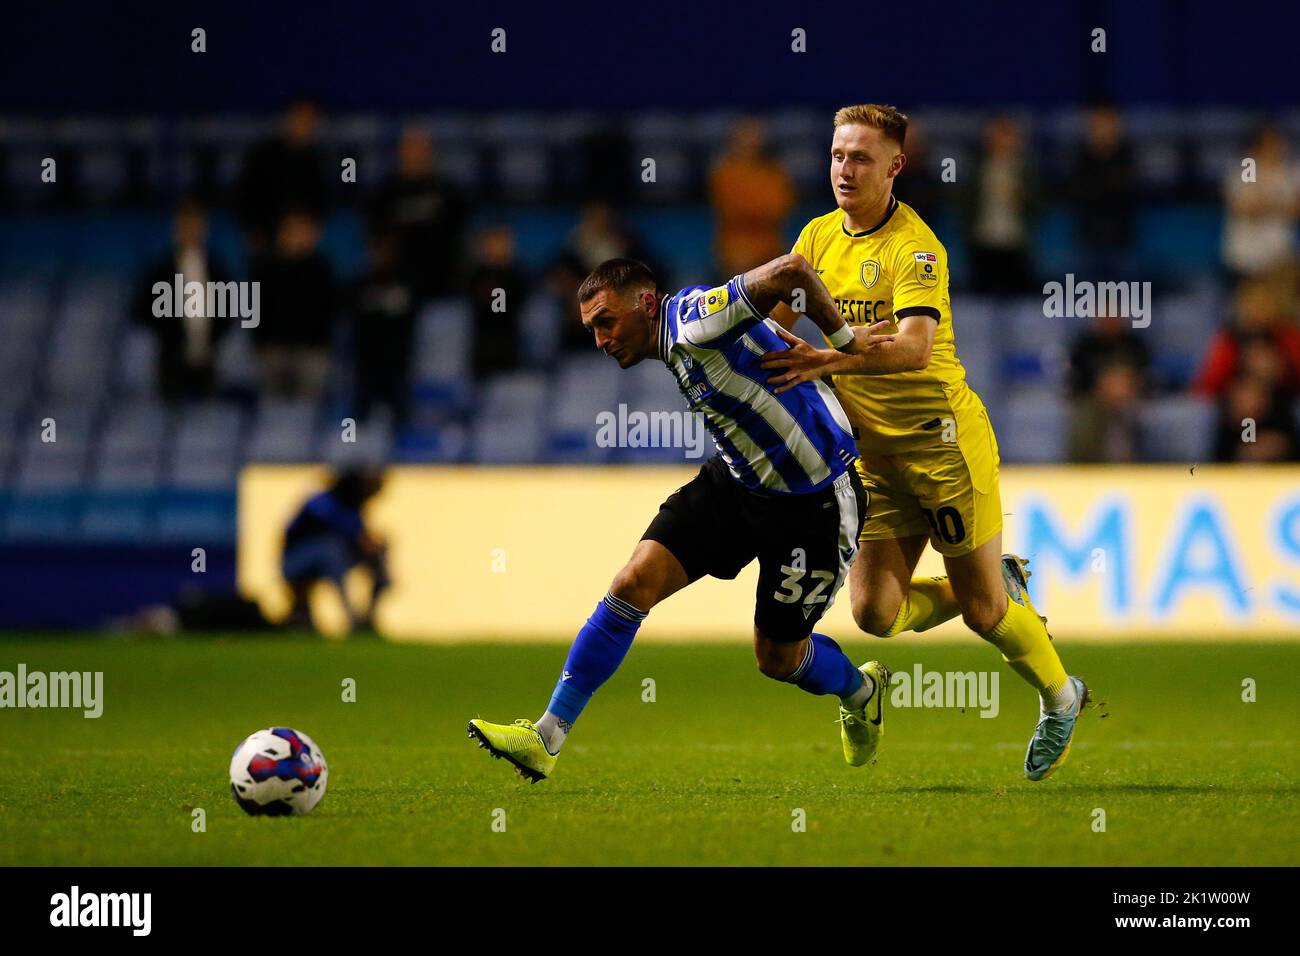 Jack Hunt #32 of Sheffield Wednesday and Davis Keillor-Dunn #10 of Burton Albion during the Papa John's Trophy match Sheffield Wednesday vs Burton Albion at Hillsborough, Sheffield, United Kingdom, 20th September 2022  (Photo by Ben Early/News Images) Stock Photo